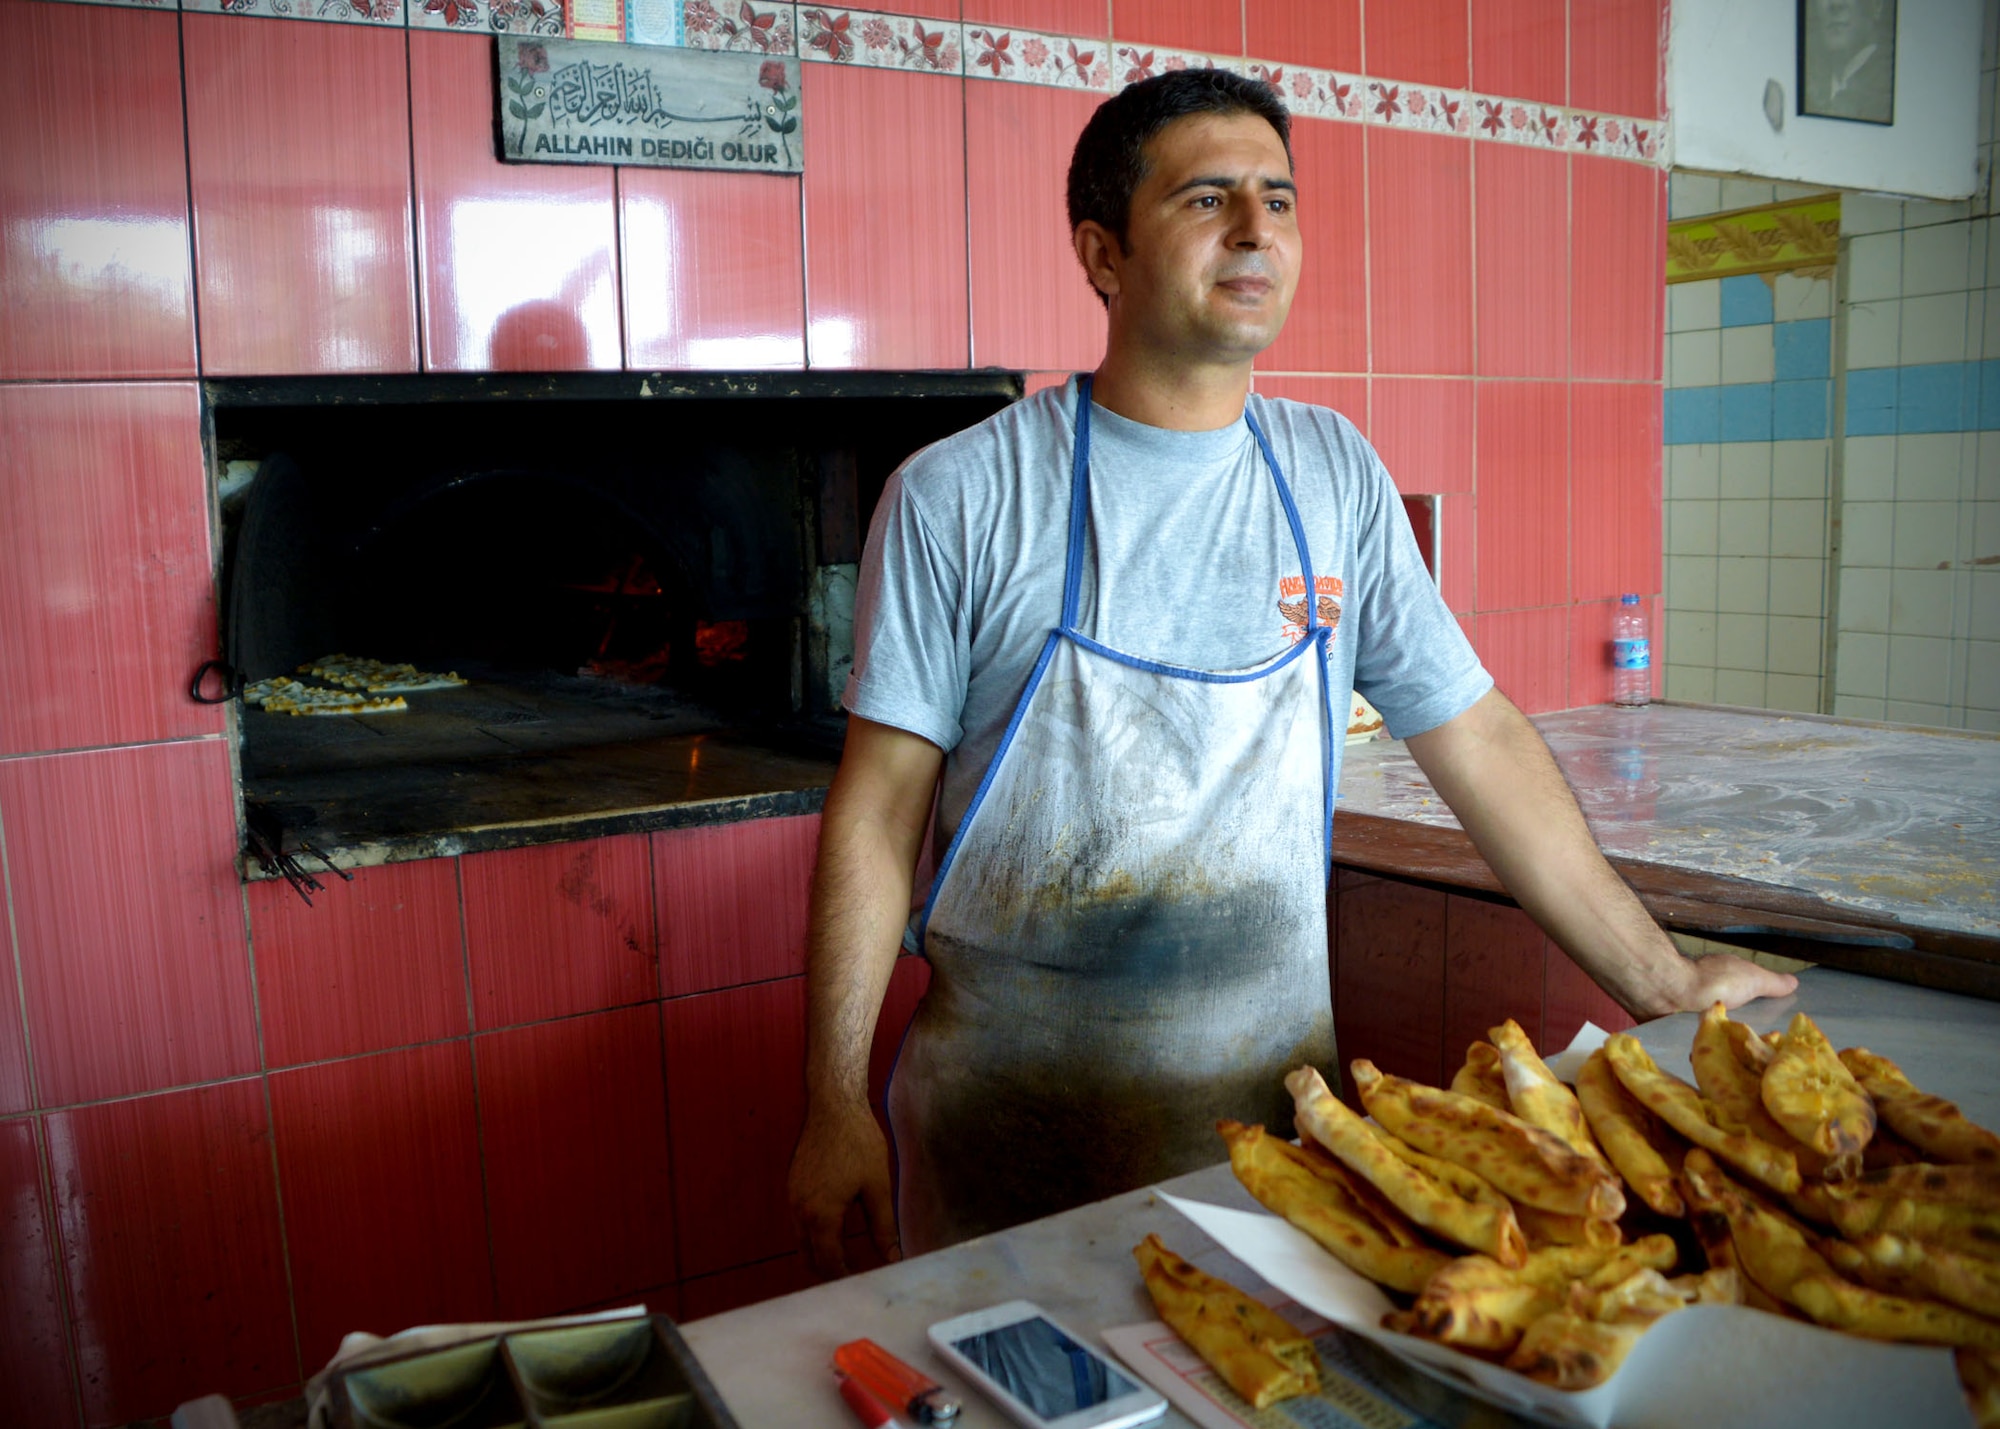 A man waits for bread to bake at a local bakery July 9, 2014, near Incirlik Air Base, Turkey. This month marks the holy month of Ramazan for Muslims. During the month, most Muslims participate in fasting during daylight hours, which they abstain from food and drink. Bakeries offer specialty breads during this time for their evening meal. (U.S. Air Force photo by Staff Sgt. Veronica Pierce/Released)